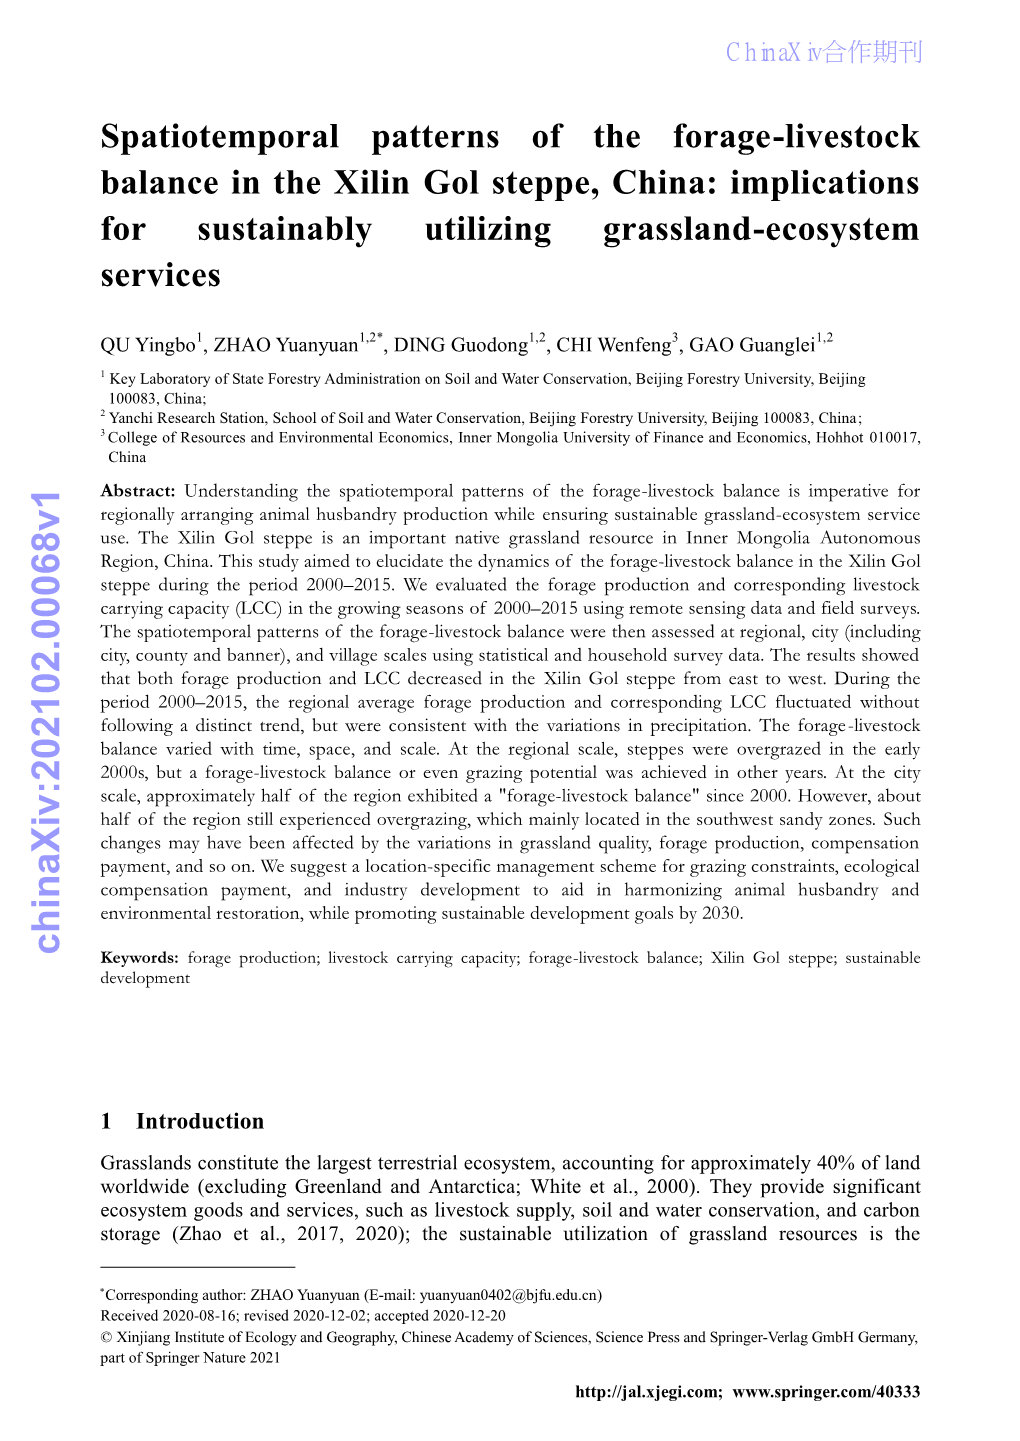 Spatiotemporal Patterns of the Forage-Livestock Balance in the Xilin Gol Steppe, China: Implications for Sustainably Utilizing Grassland-Ecosystem Services